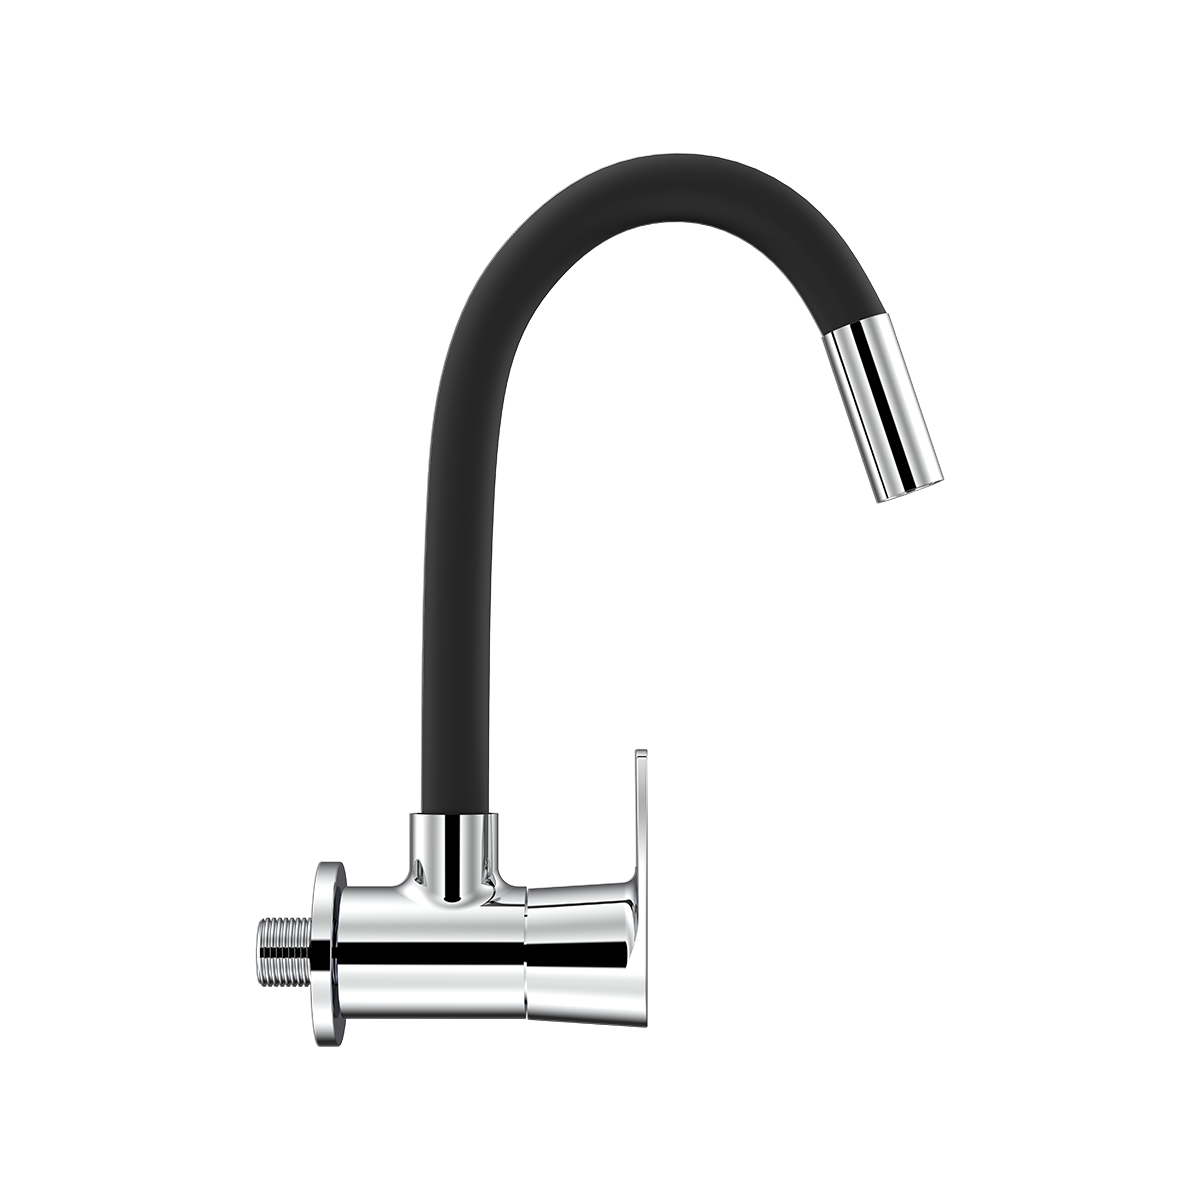 Wall Mounted Sink Cock With Swivel Flexible Spout